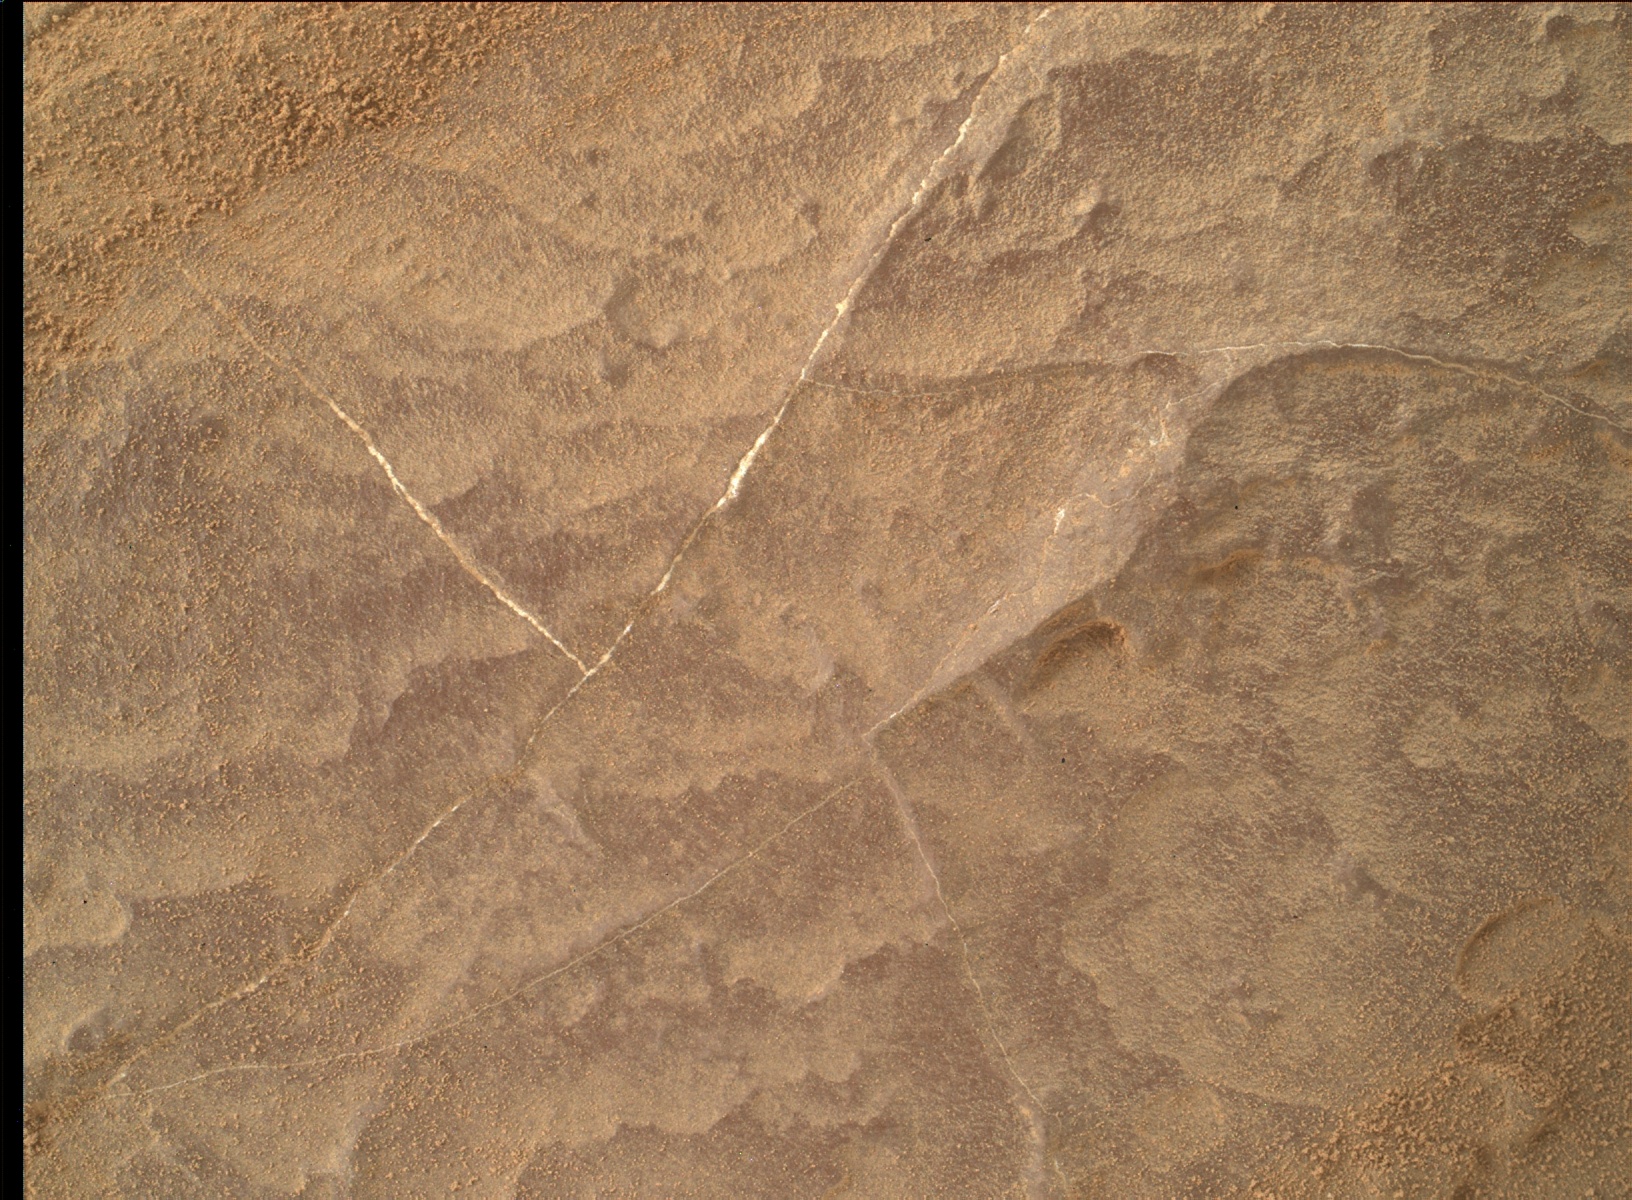 Nasa's Mars rover Curiosity acquired this image using its Mars Hand Lens Imager (MAHLI) on Sol 1870